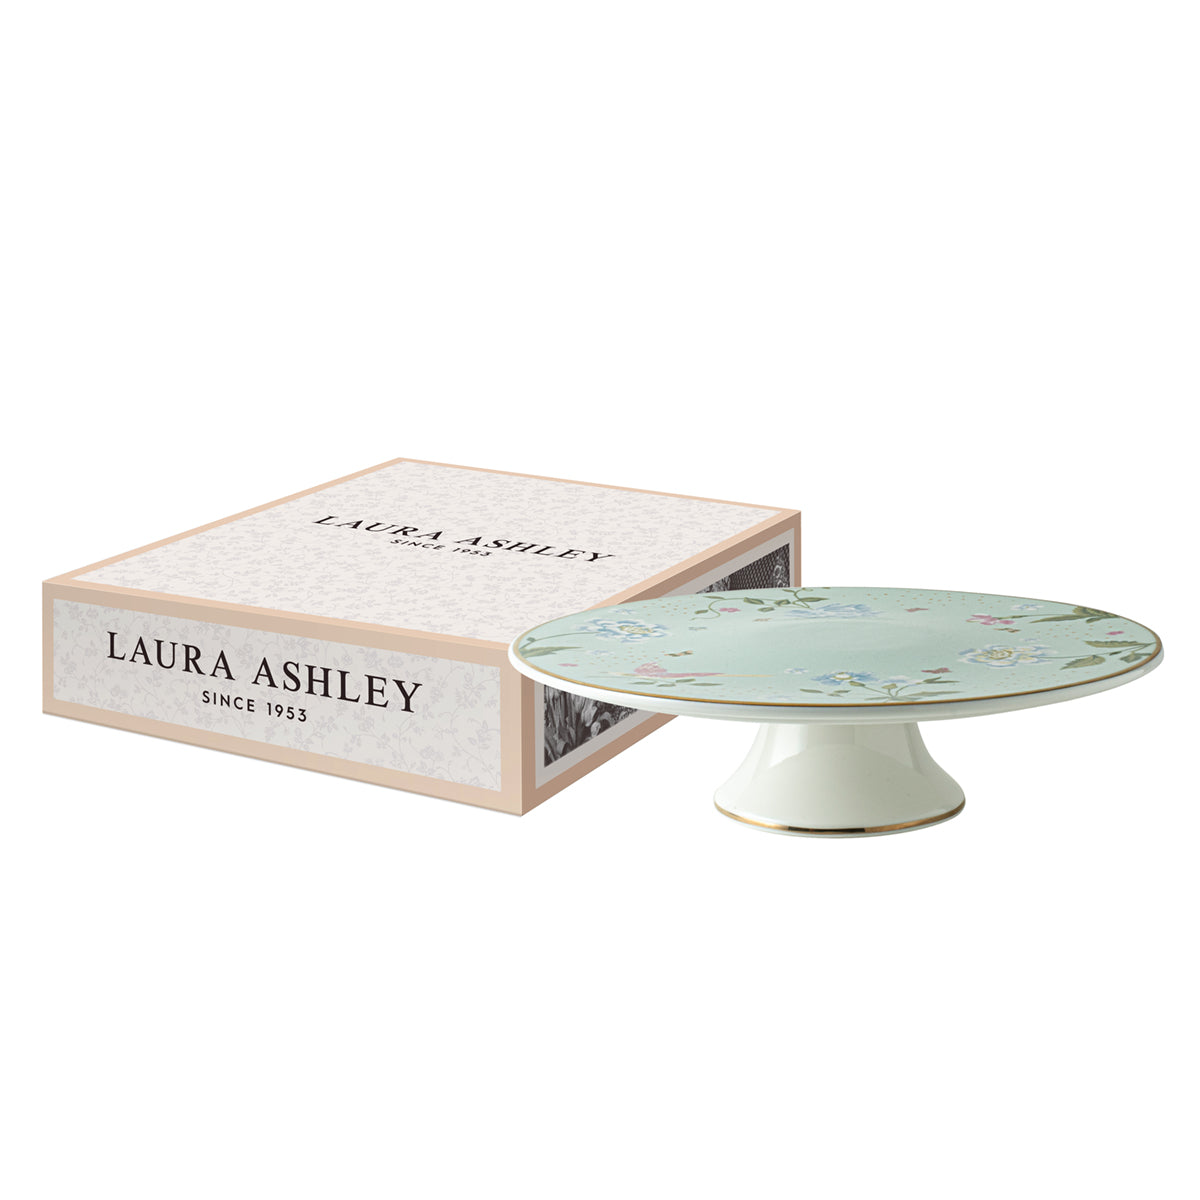 Laura Ashley Giftset Cakestand on foot 30 cm Green